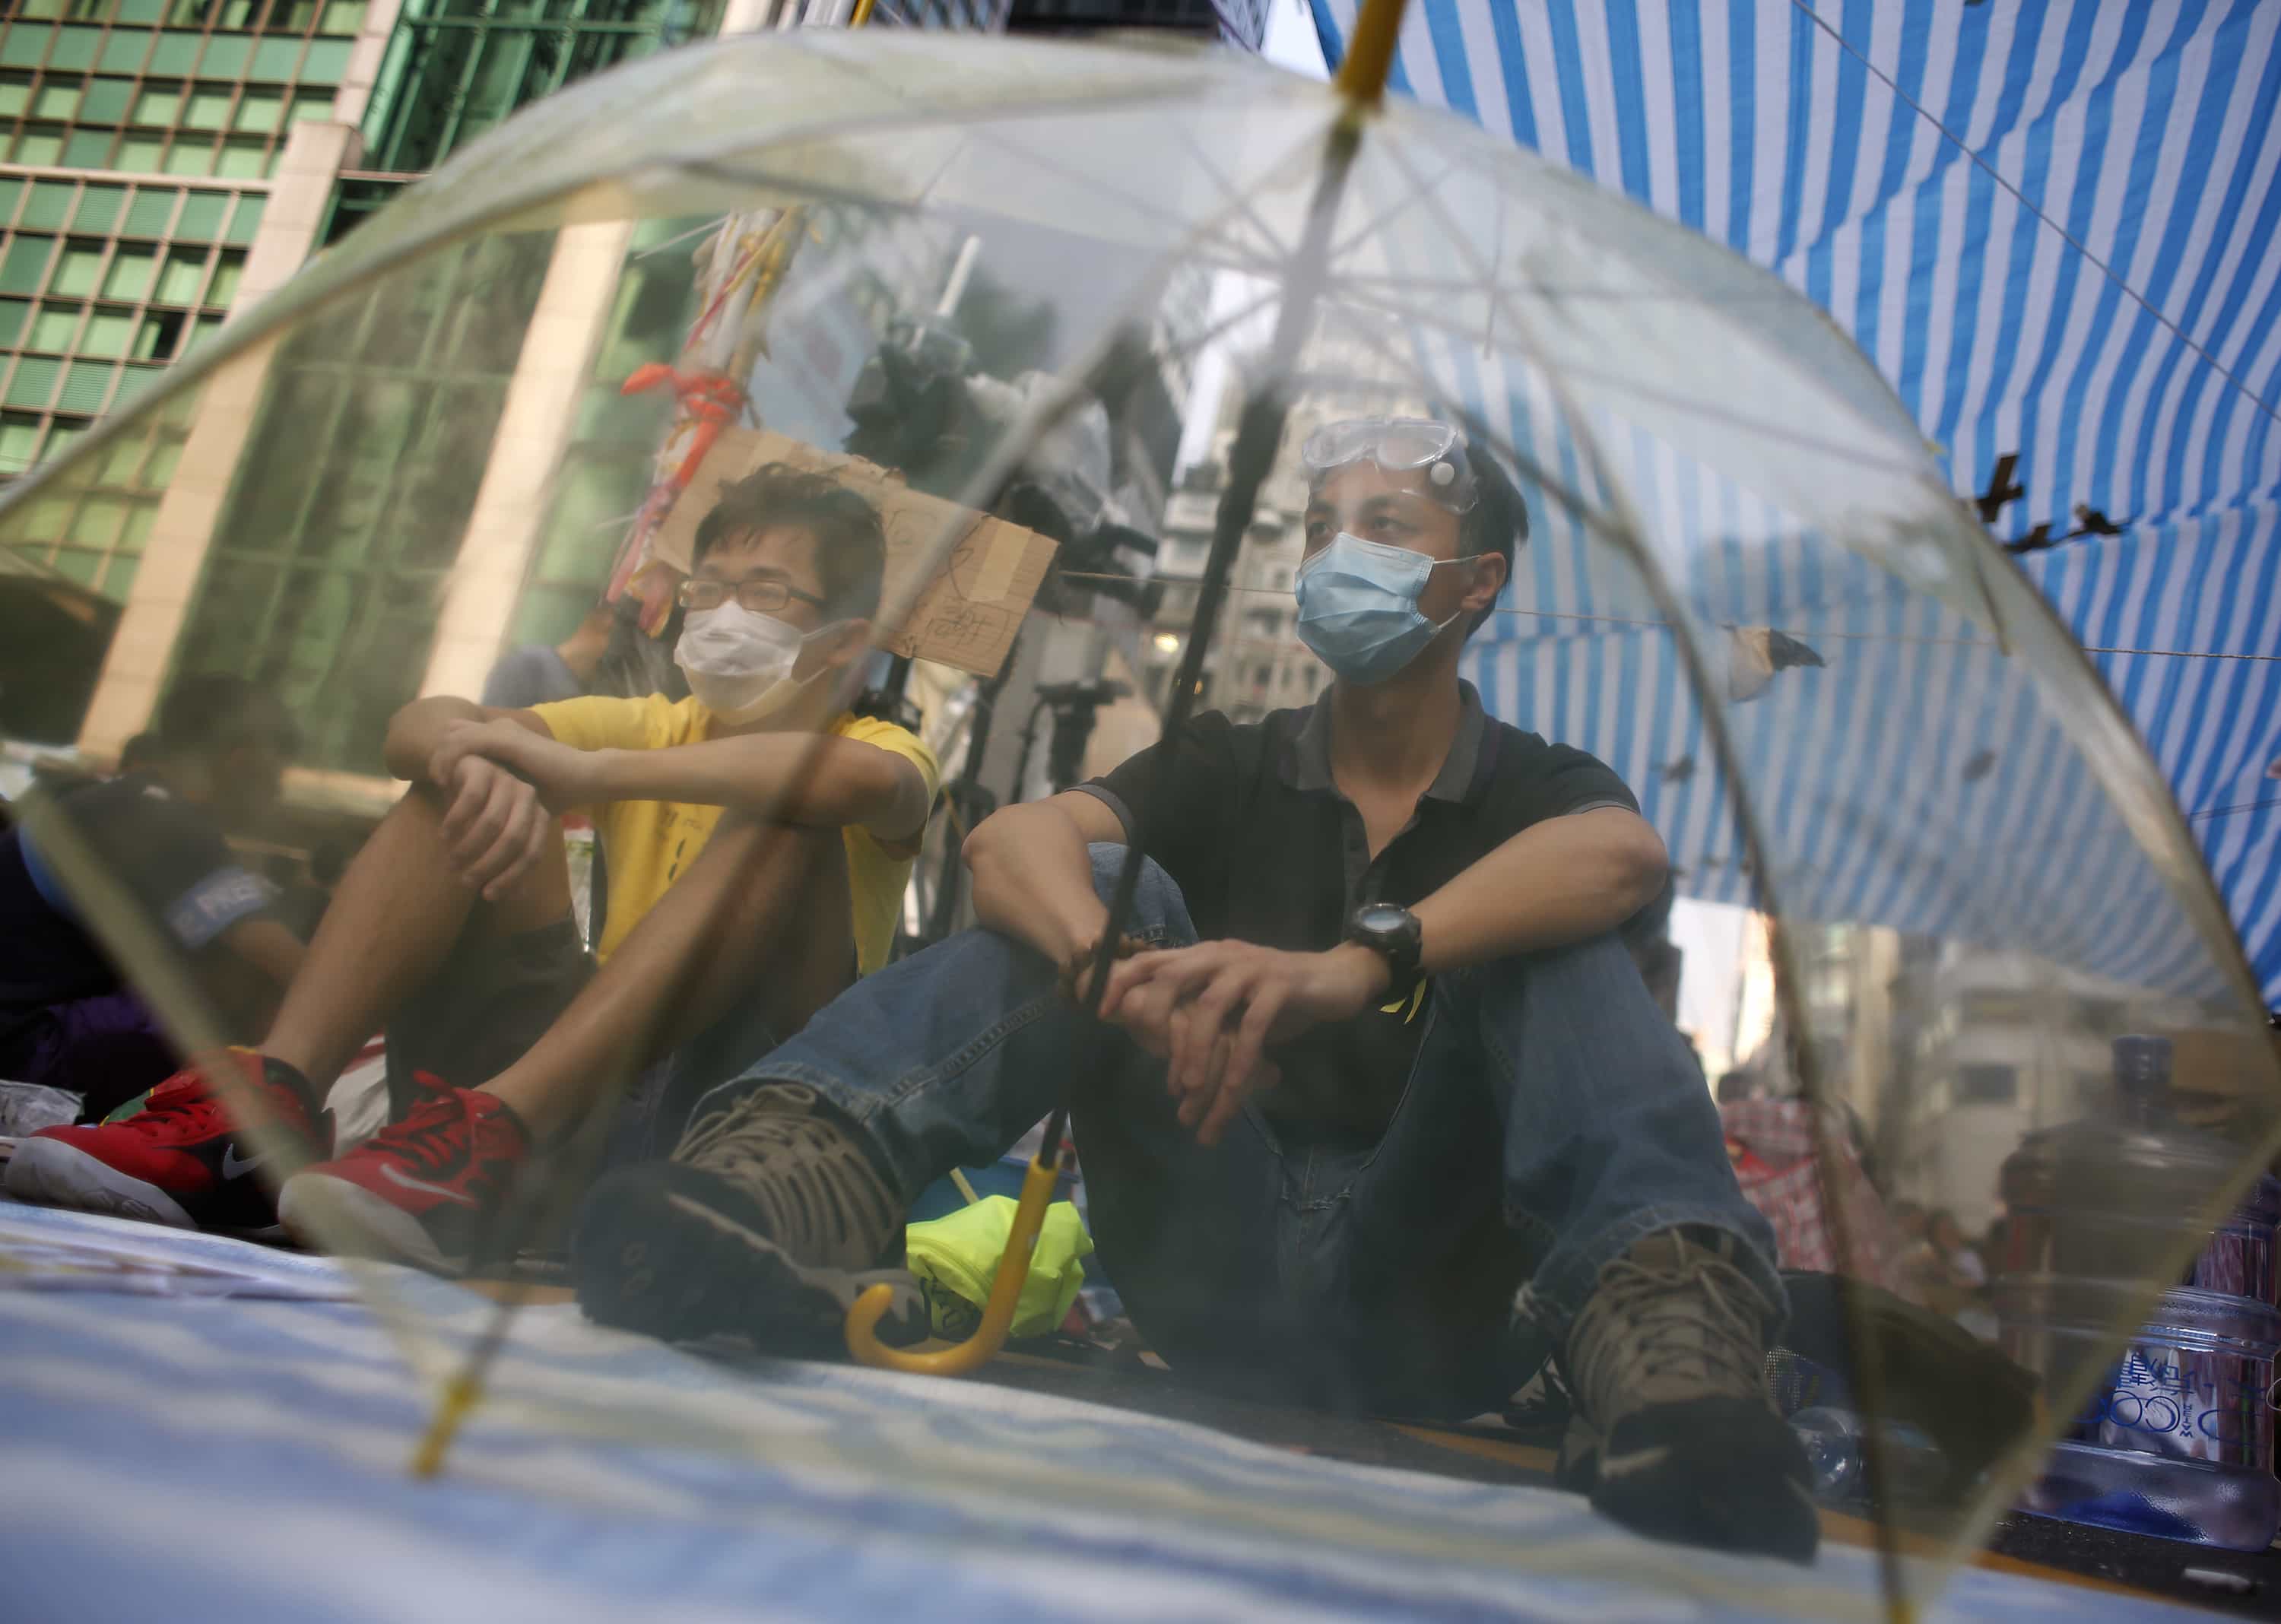 Pro-democracy protesters sitting behind an umbrella guard a tent from possible attacks by anti-Occupy Central protesters in Hong Kong, 5 October 2014, REUTERS/Bobby Yip